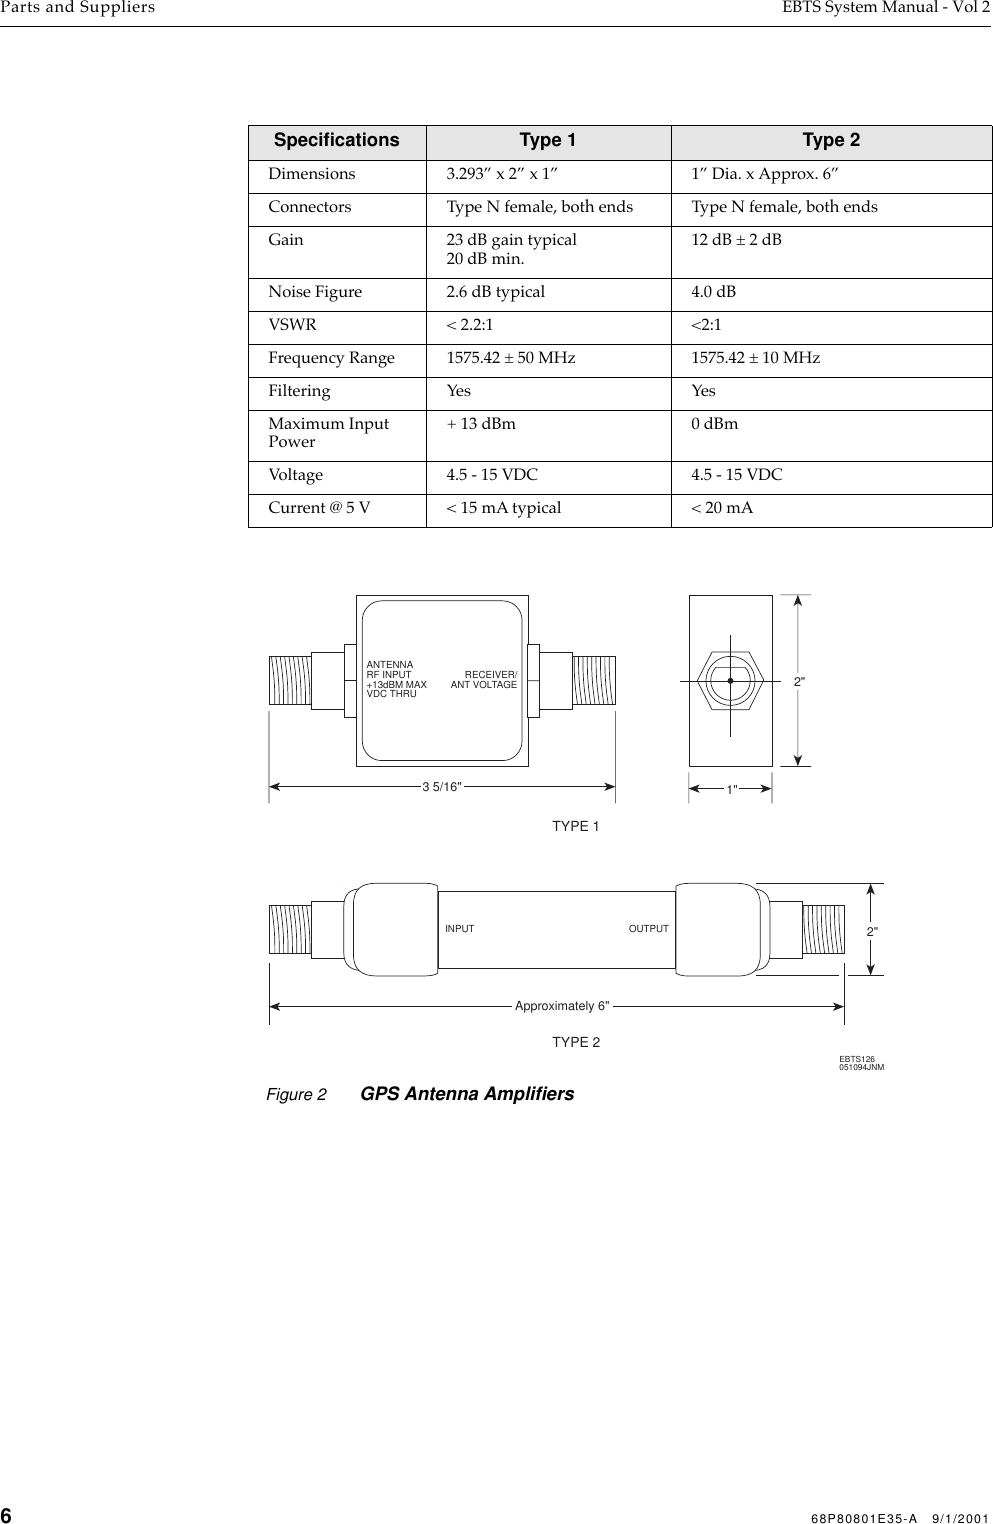 668P80801E35-A   9/1/2001Parts and Suppliers EBTS System Manual - Vol 2 Speciﬁcations Type 1 Type 2Dimensions 3.293” x 2” x 1” 1” Dia. x Approx. 6”Connectors Type N female, both ends Type N female, both endsGain 23 dB gain typical20 dB min.12 dB ± 2 dBNoise Figure  2.6 dB typical 4.0 dBVSWR &lt; 2.2:1 &lt;2:1Frequency Range 1575.42 ± 50 MHz 1575.42 ± 10 MHzFiltering Yes YesMaximum Input Power+ 13 dBm 0 dBmVoltage 4.5 - 15 VDC 4.5 - 15 VDCCurrent @ 5 V &lt; 15 mA typical &lt; 20 mAFigure 2 GPS Antenna AmpliﬁersEBTS126051094JNMTYPE 1TYPE 21&quot;2&quot;3 5/16&quot;ANTENNARF INPUT+13dBM MAXVDC THRURECEIVER/ANT VOLTAGEApproximately 6&quot;2&quot;INPUT OUTPUT